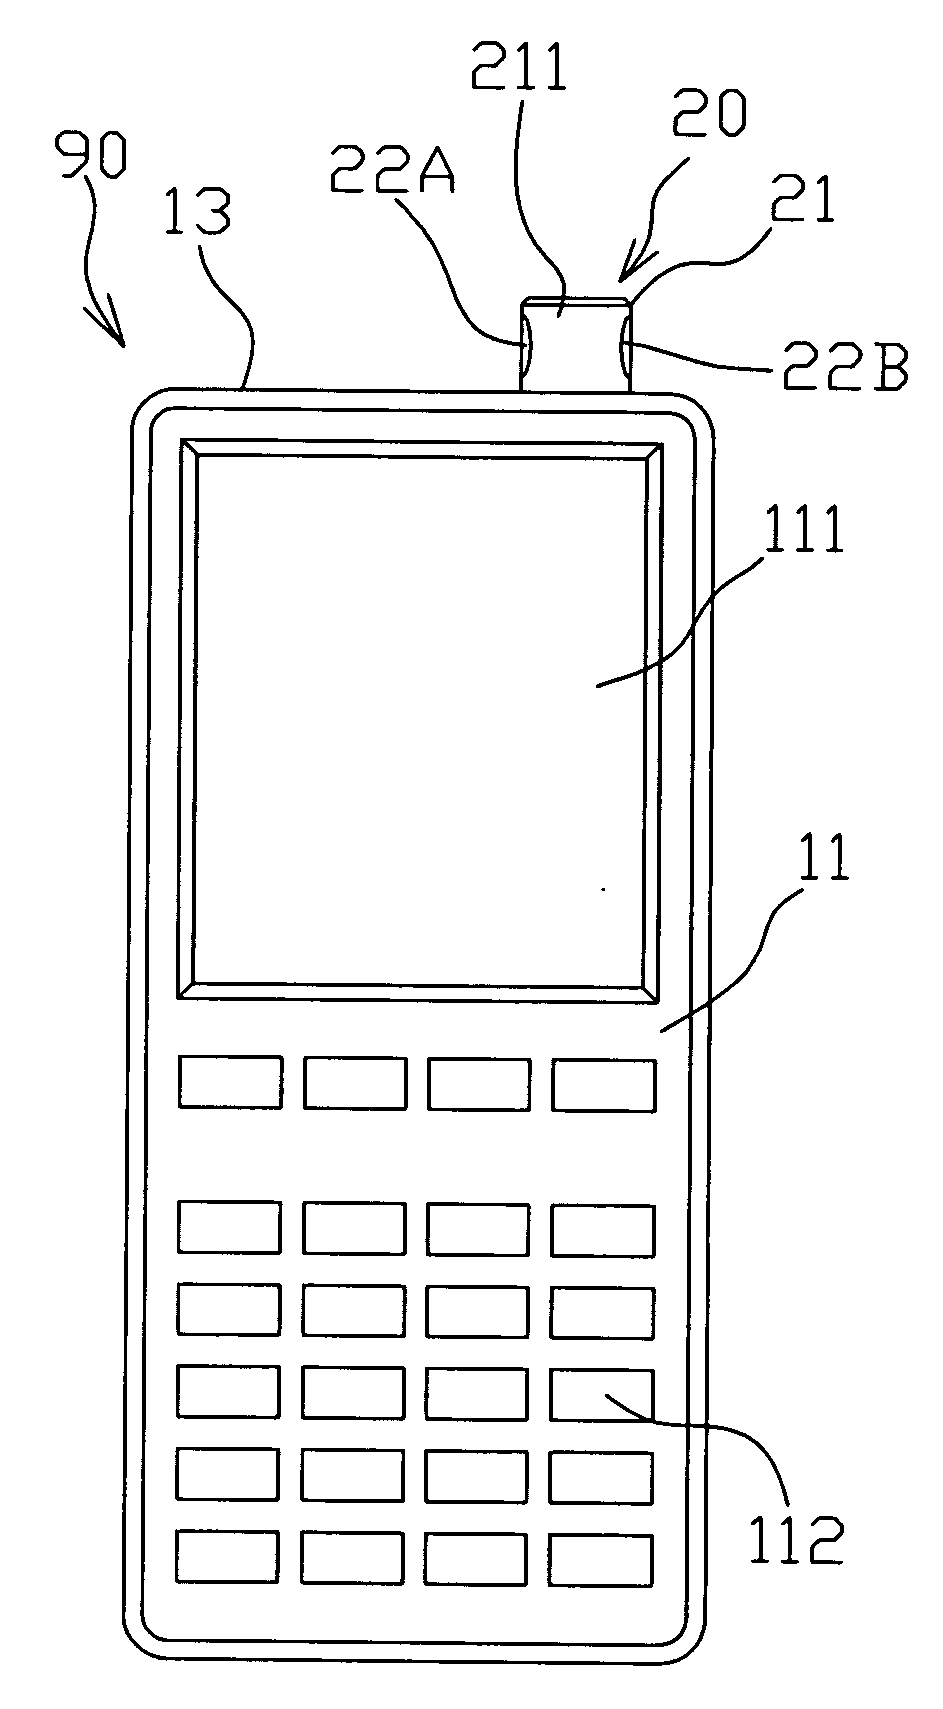 Structure of photographic apparatus